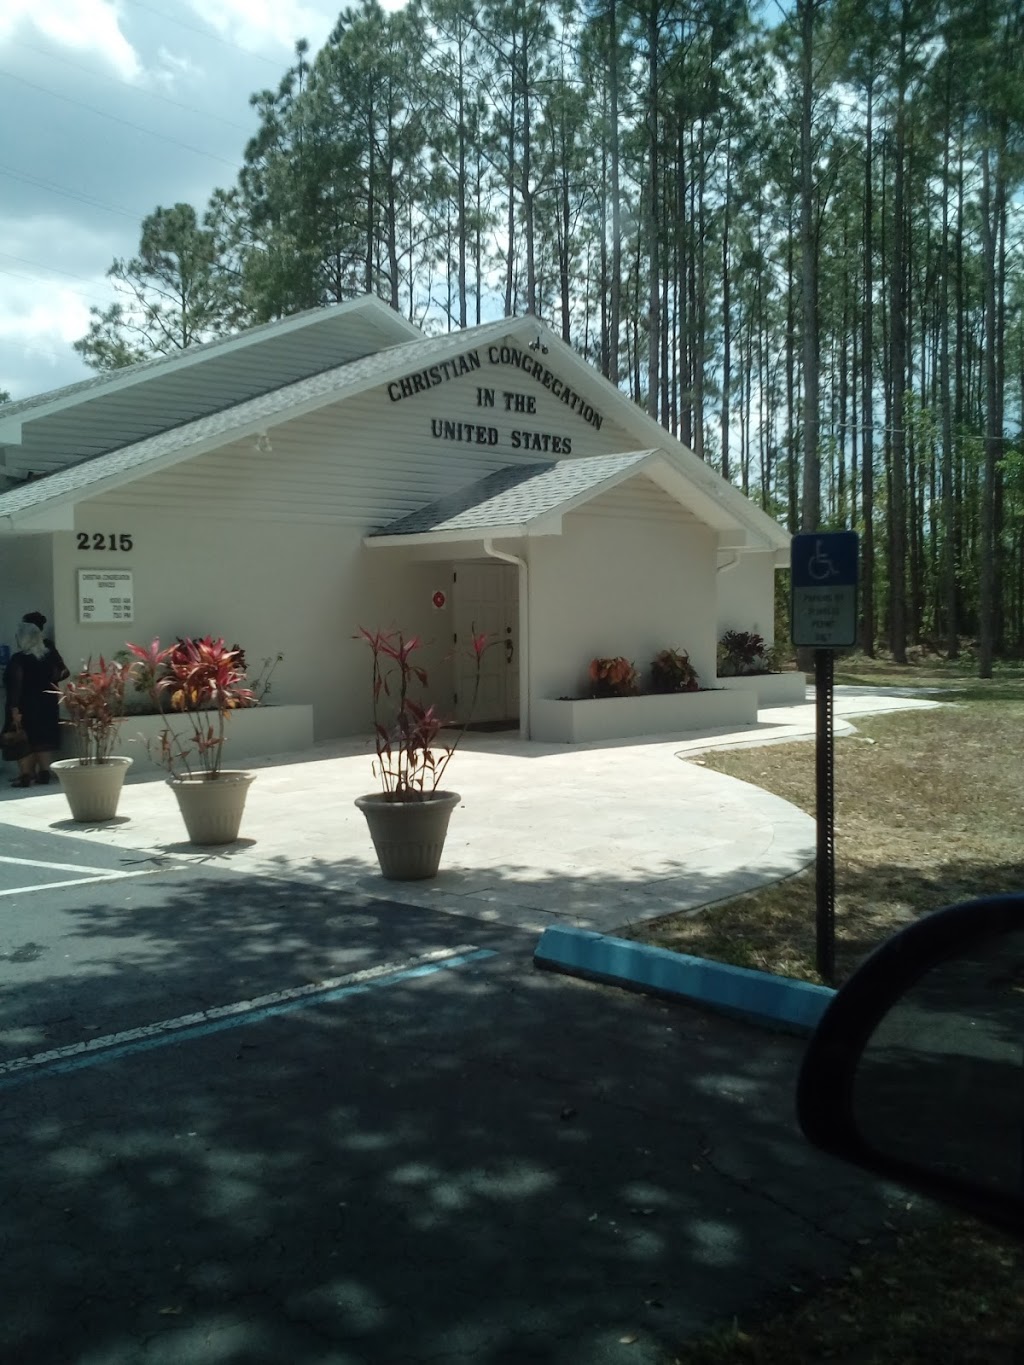 ChristianCcongregation In The United State - Tampa - Lutz | 2215 Clement Rd, Lutz, FL 33549, USA | Phone: (813) 816-1584